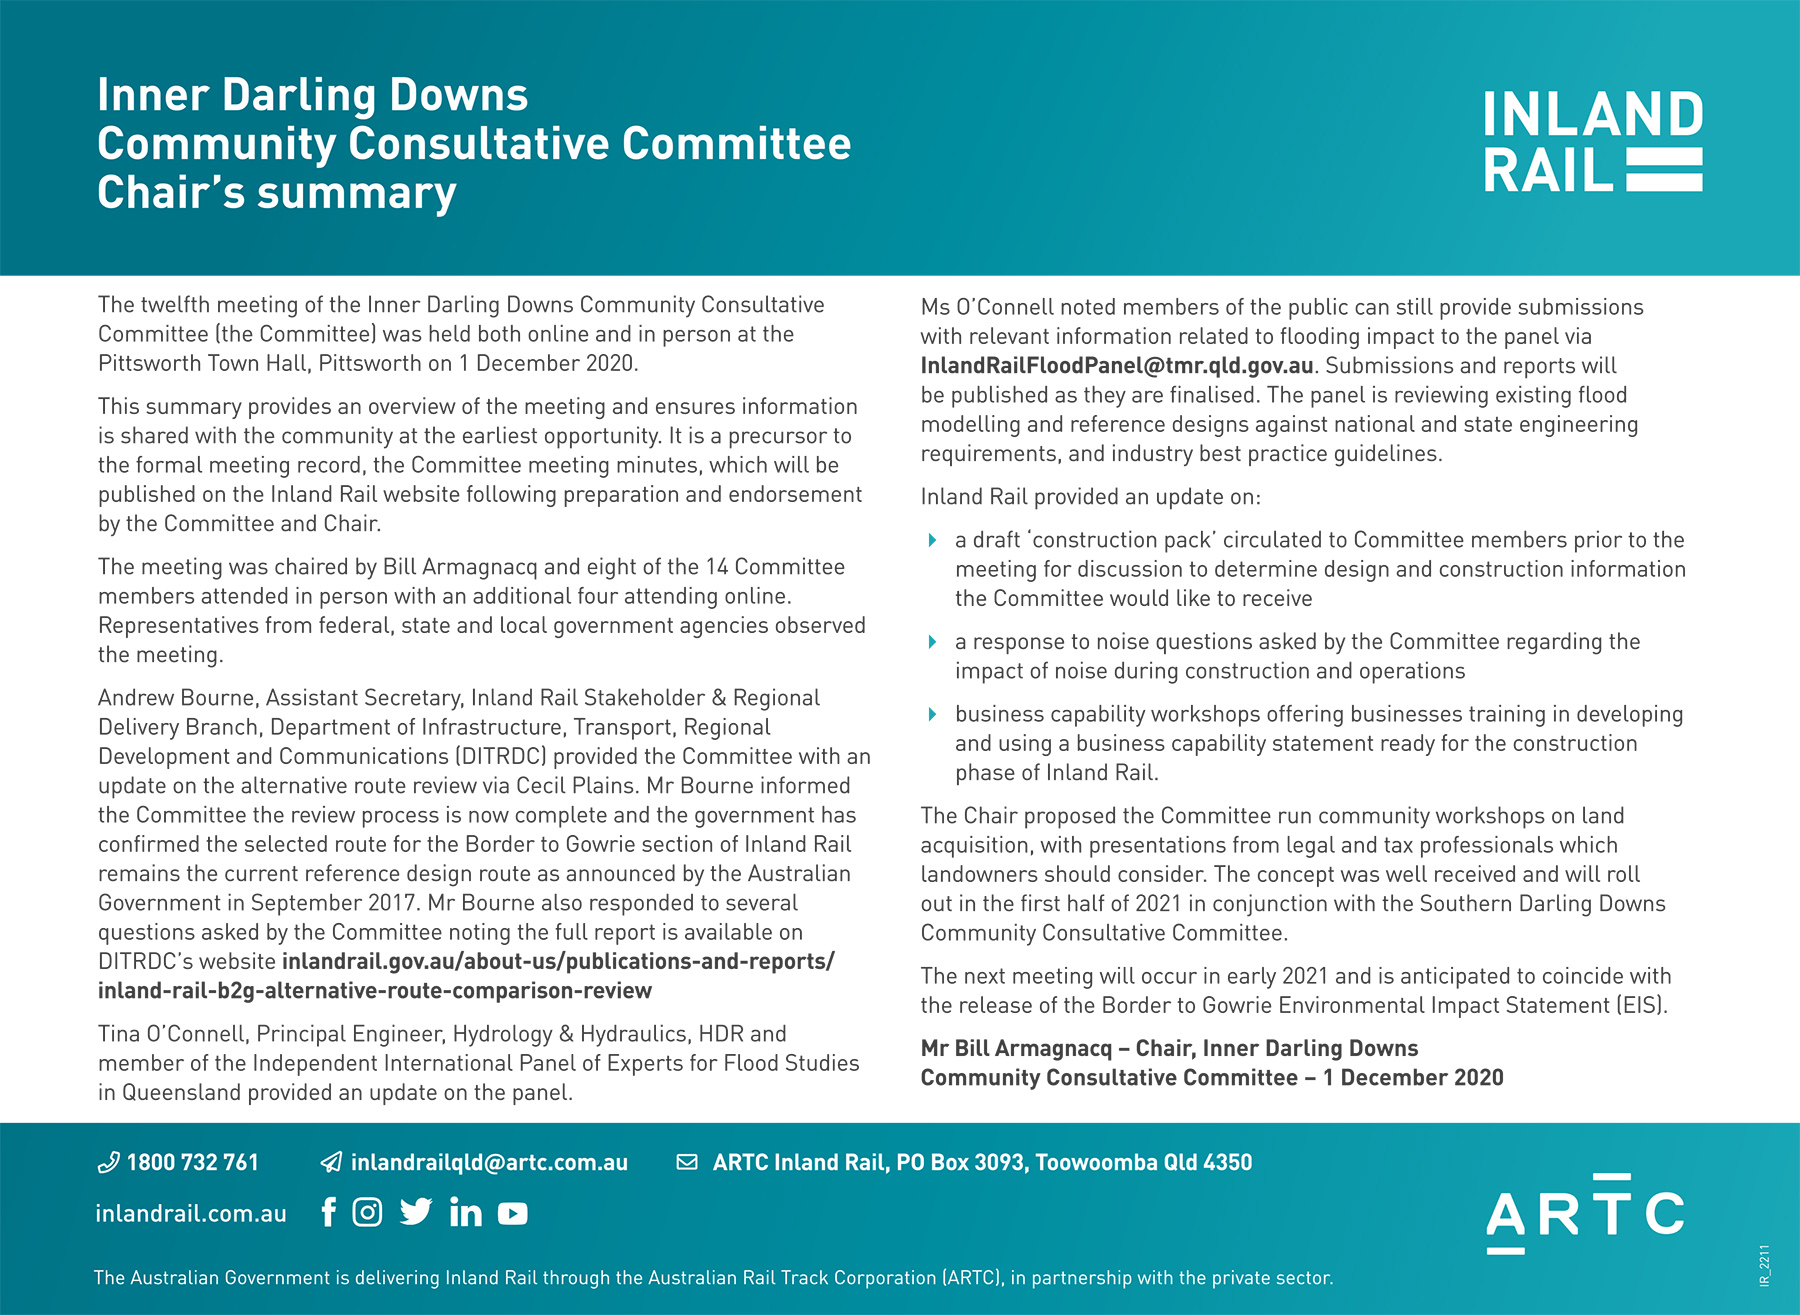 Inner Darling Downs Community Consultative Committee Chair's sum